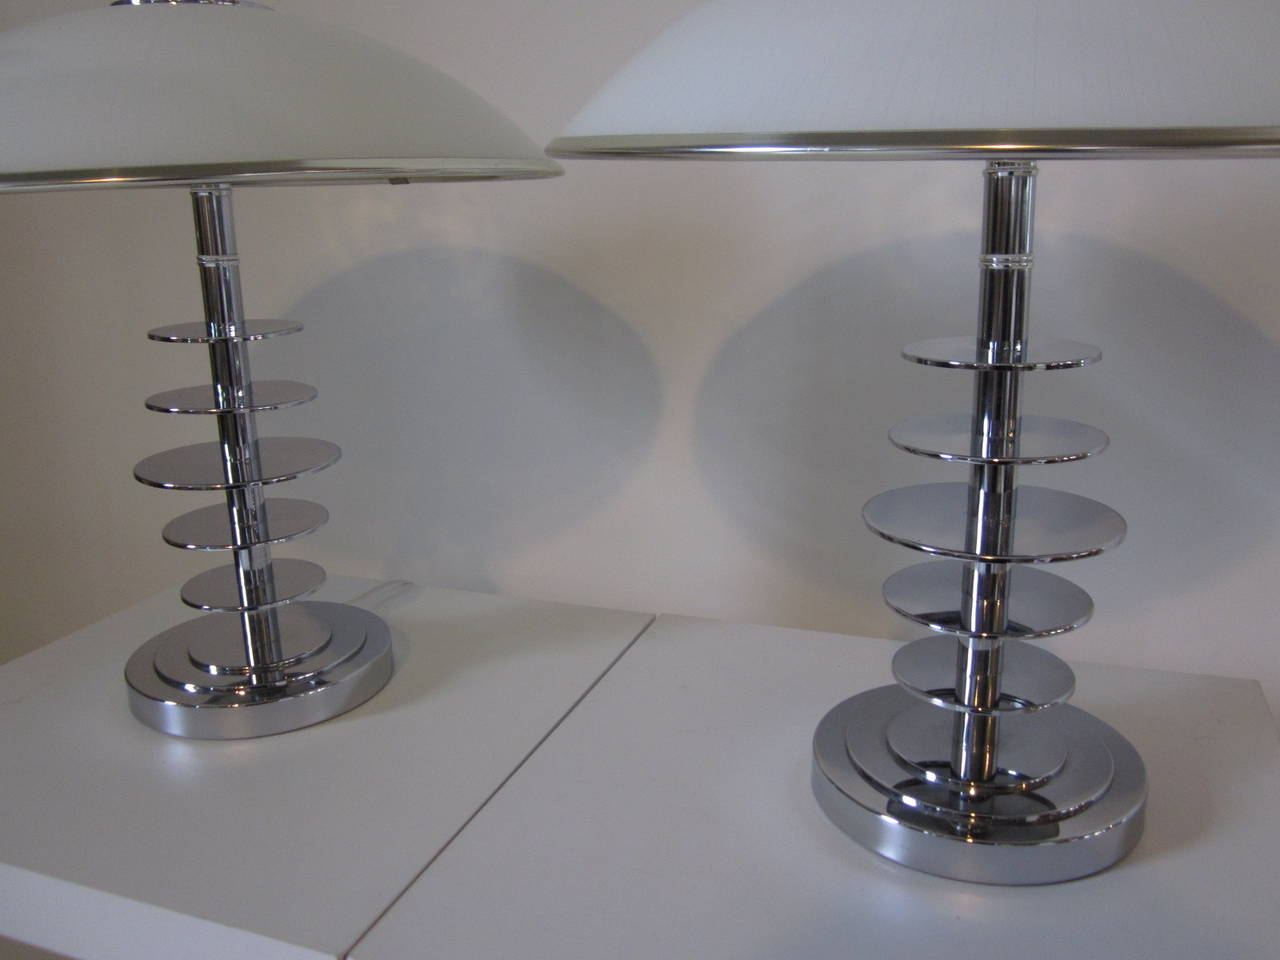 A pair of chrome ringed table lamps with domed glass shades with slight gray toned pinstripes imbedded in the shade with chrome trim and upper CAP with final. In the style of Italian artist Ingo Maurer. Shade size is 18.13